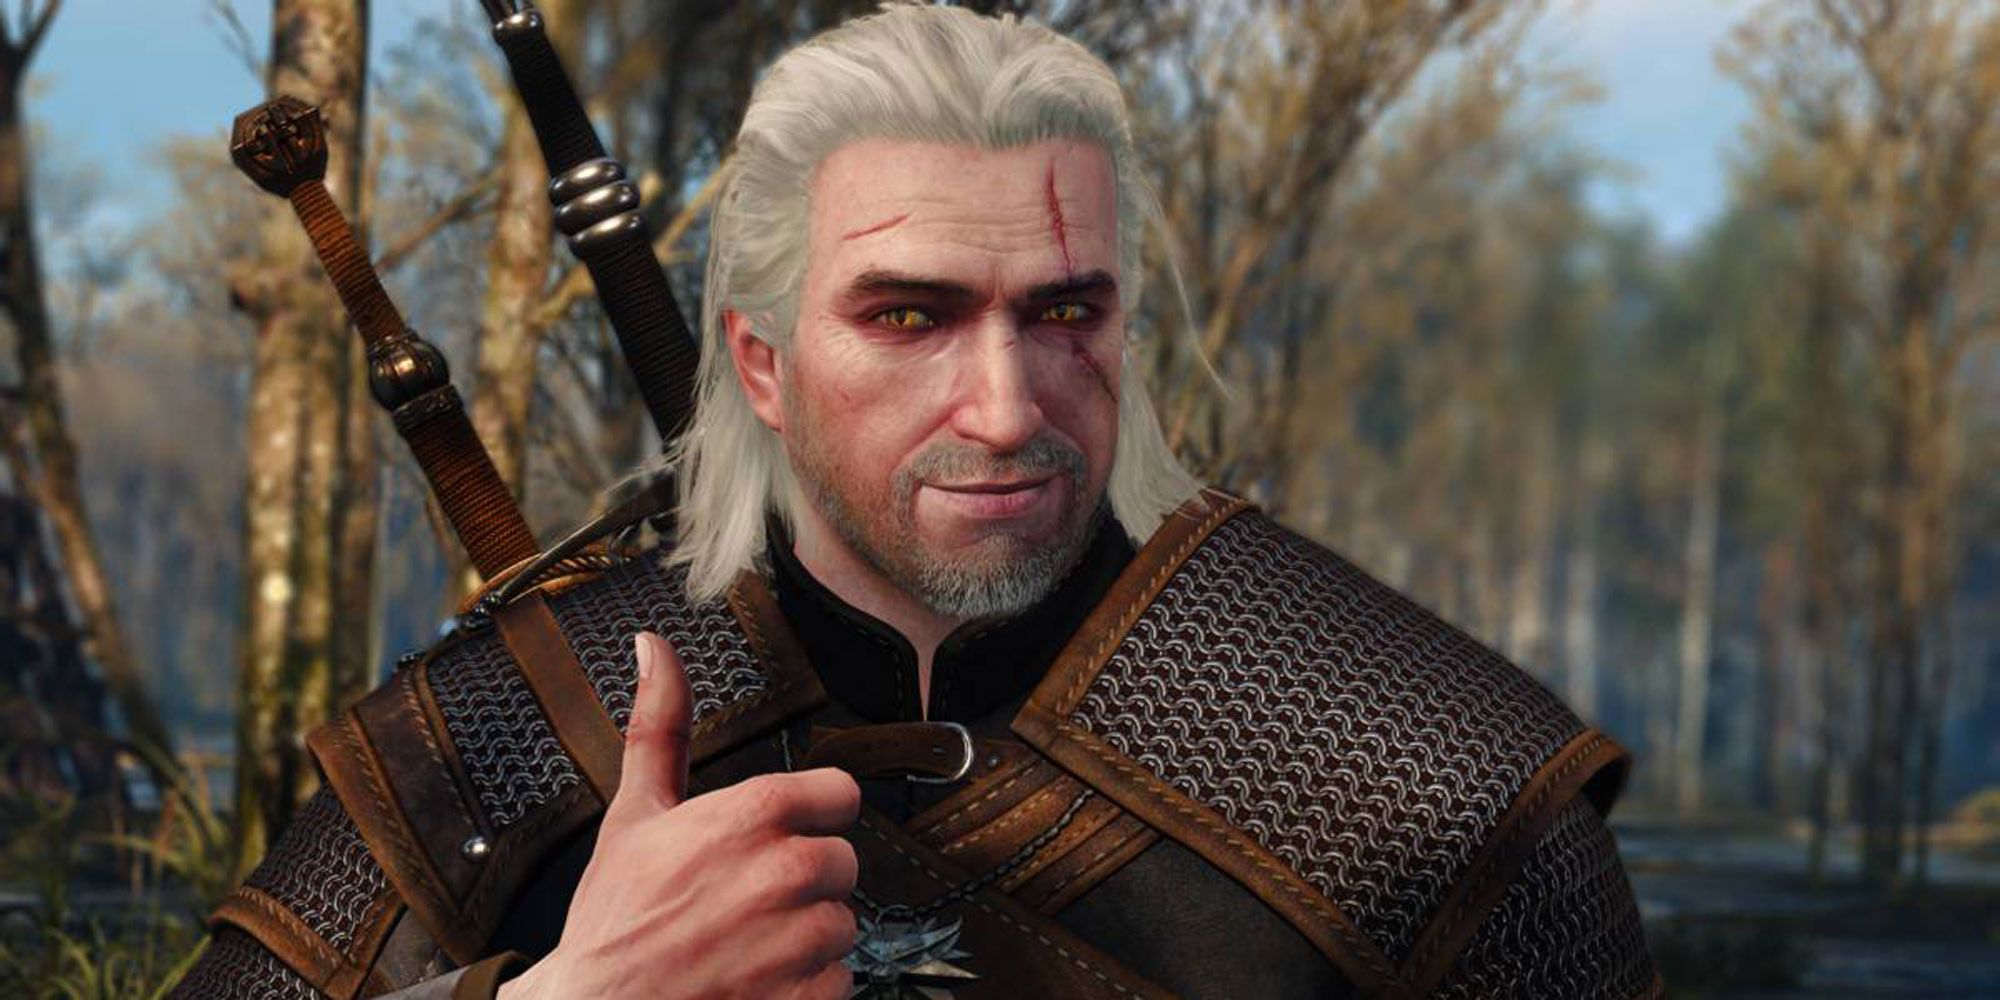 Geralt smiling and giving a thumbs up in The Witcher 3: Wild Hunt